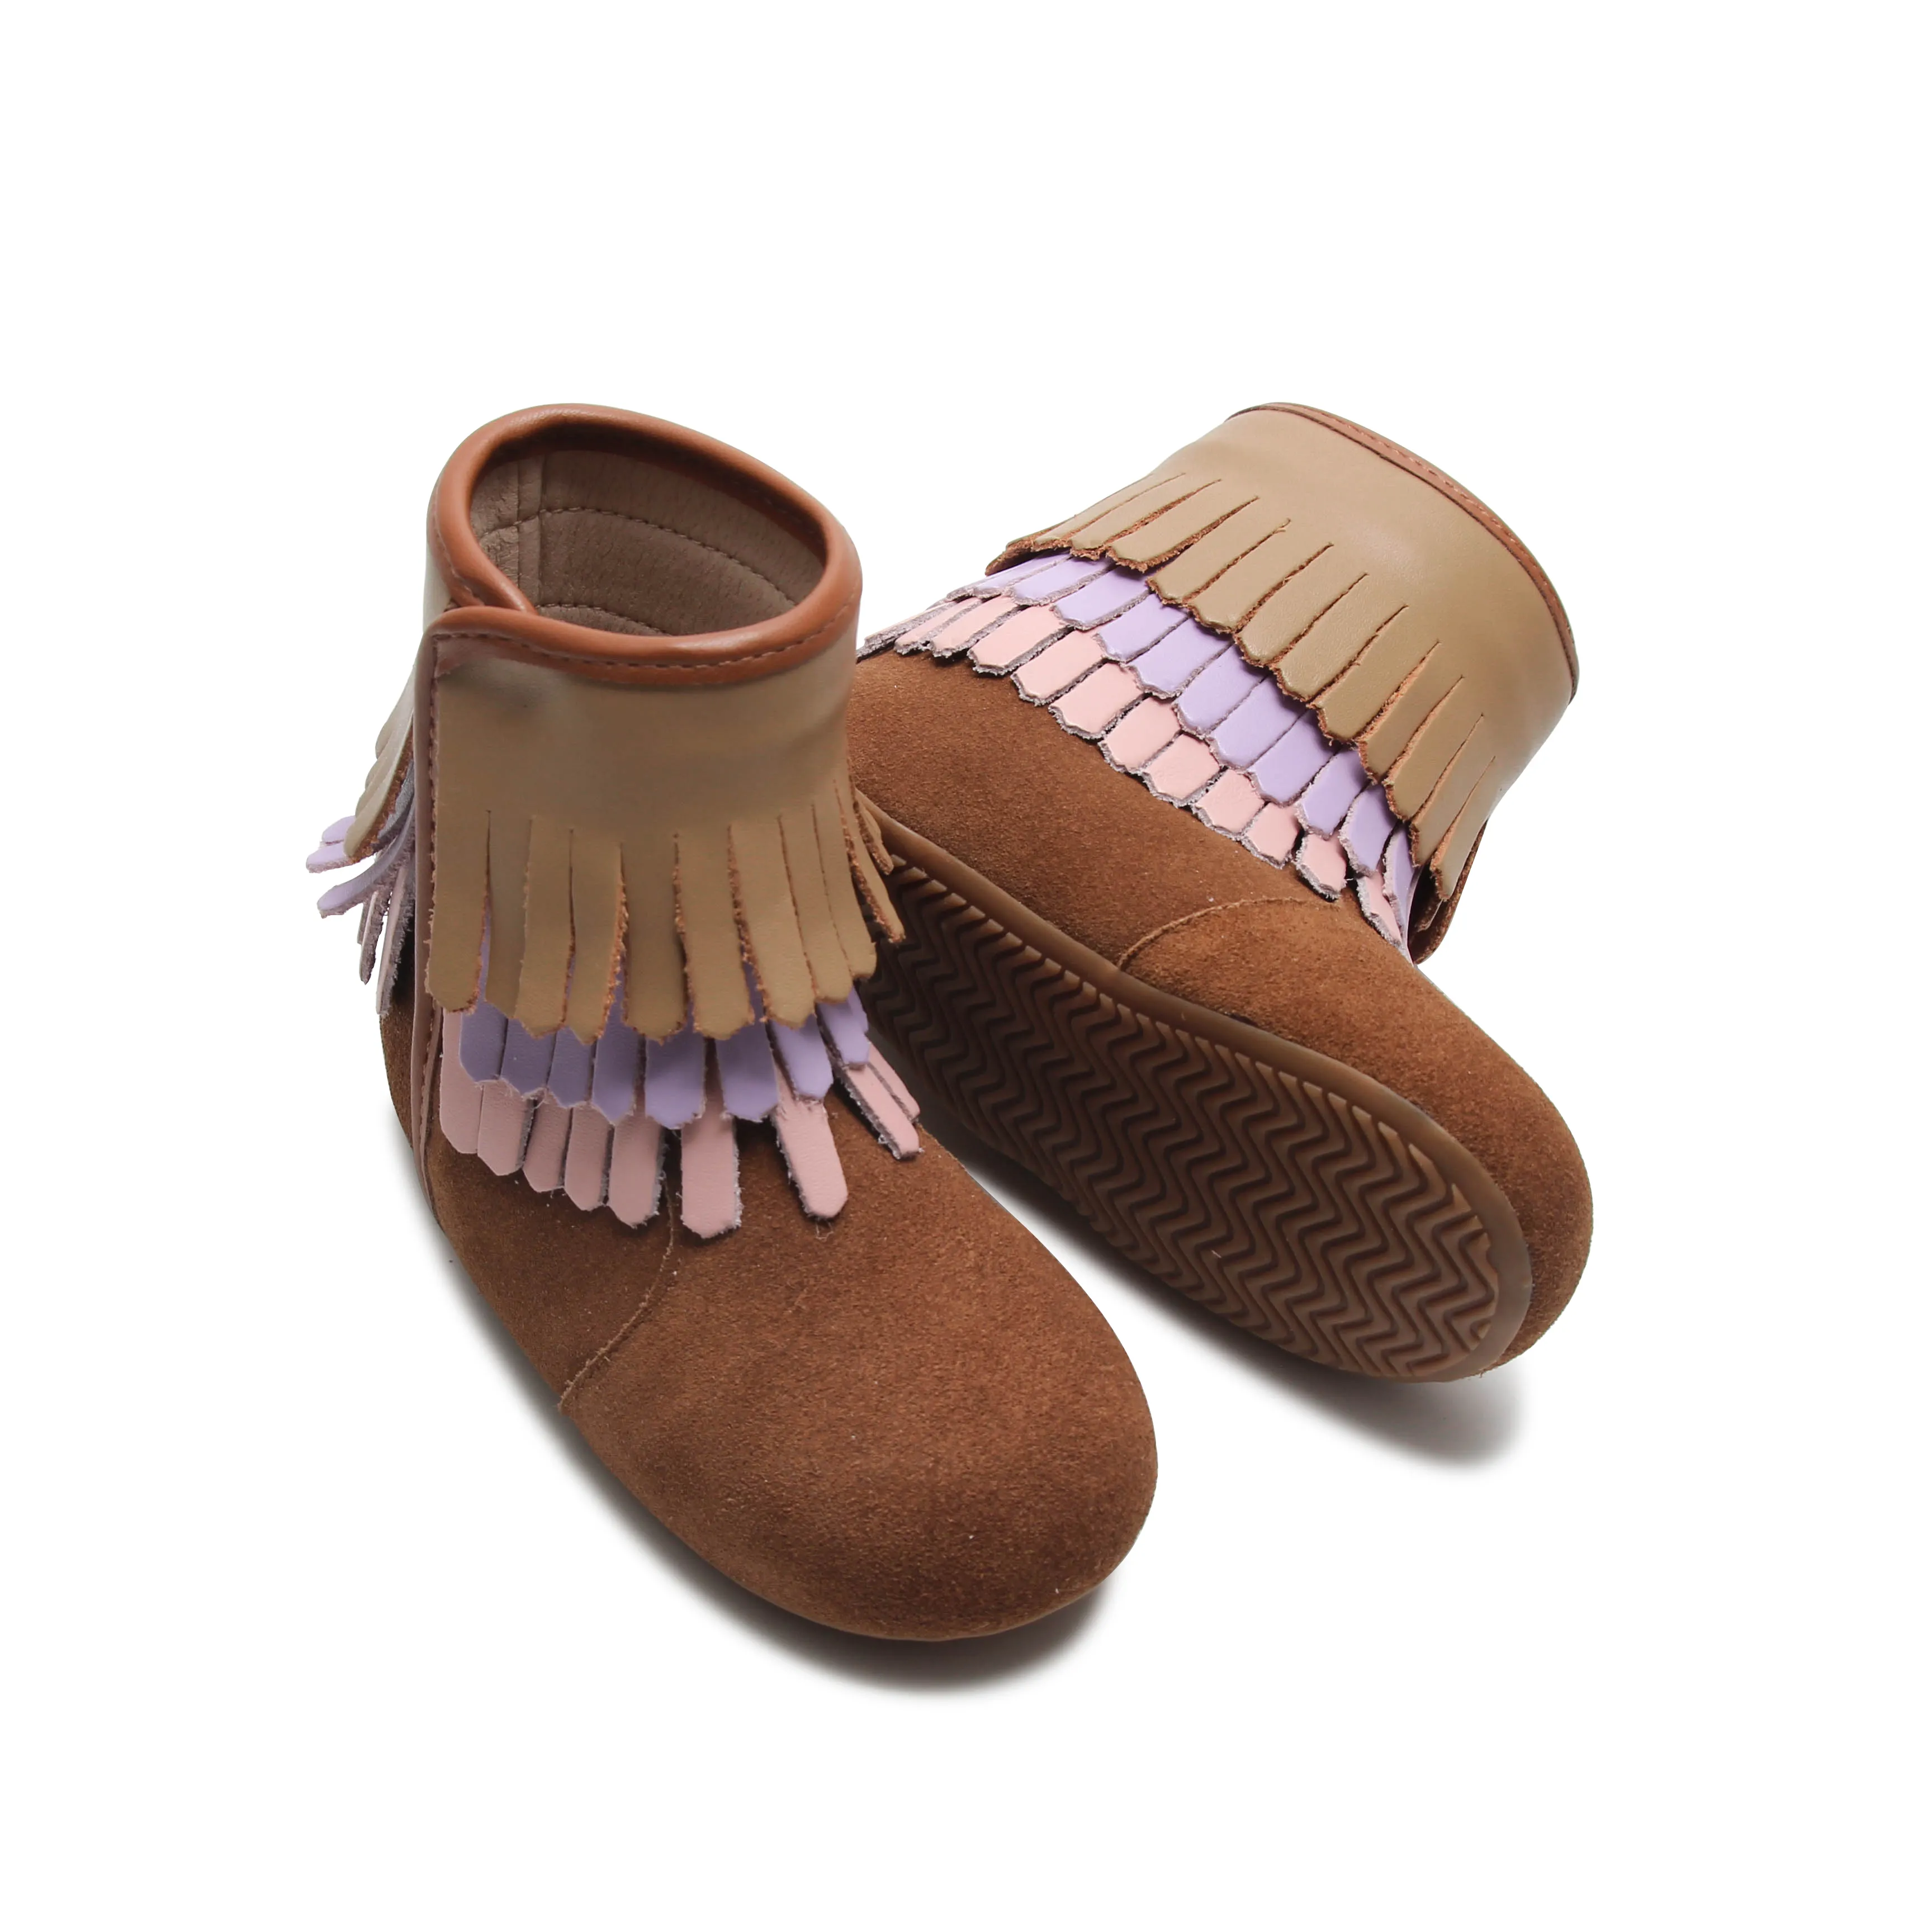 Factory Wholesale Tassel Style Leather Suede Kids Ankle Boots Fashion Beautiful Children's Girls Boots